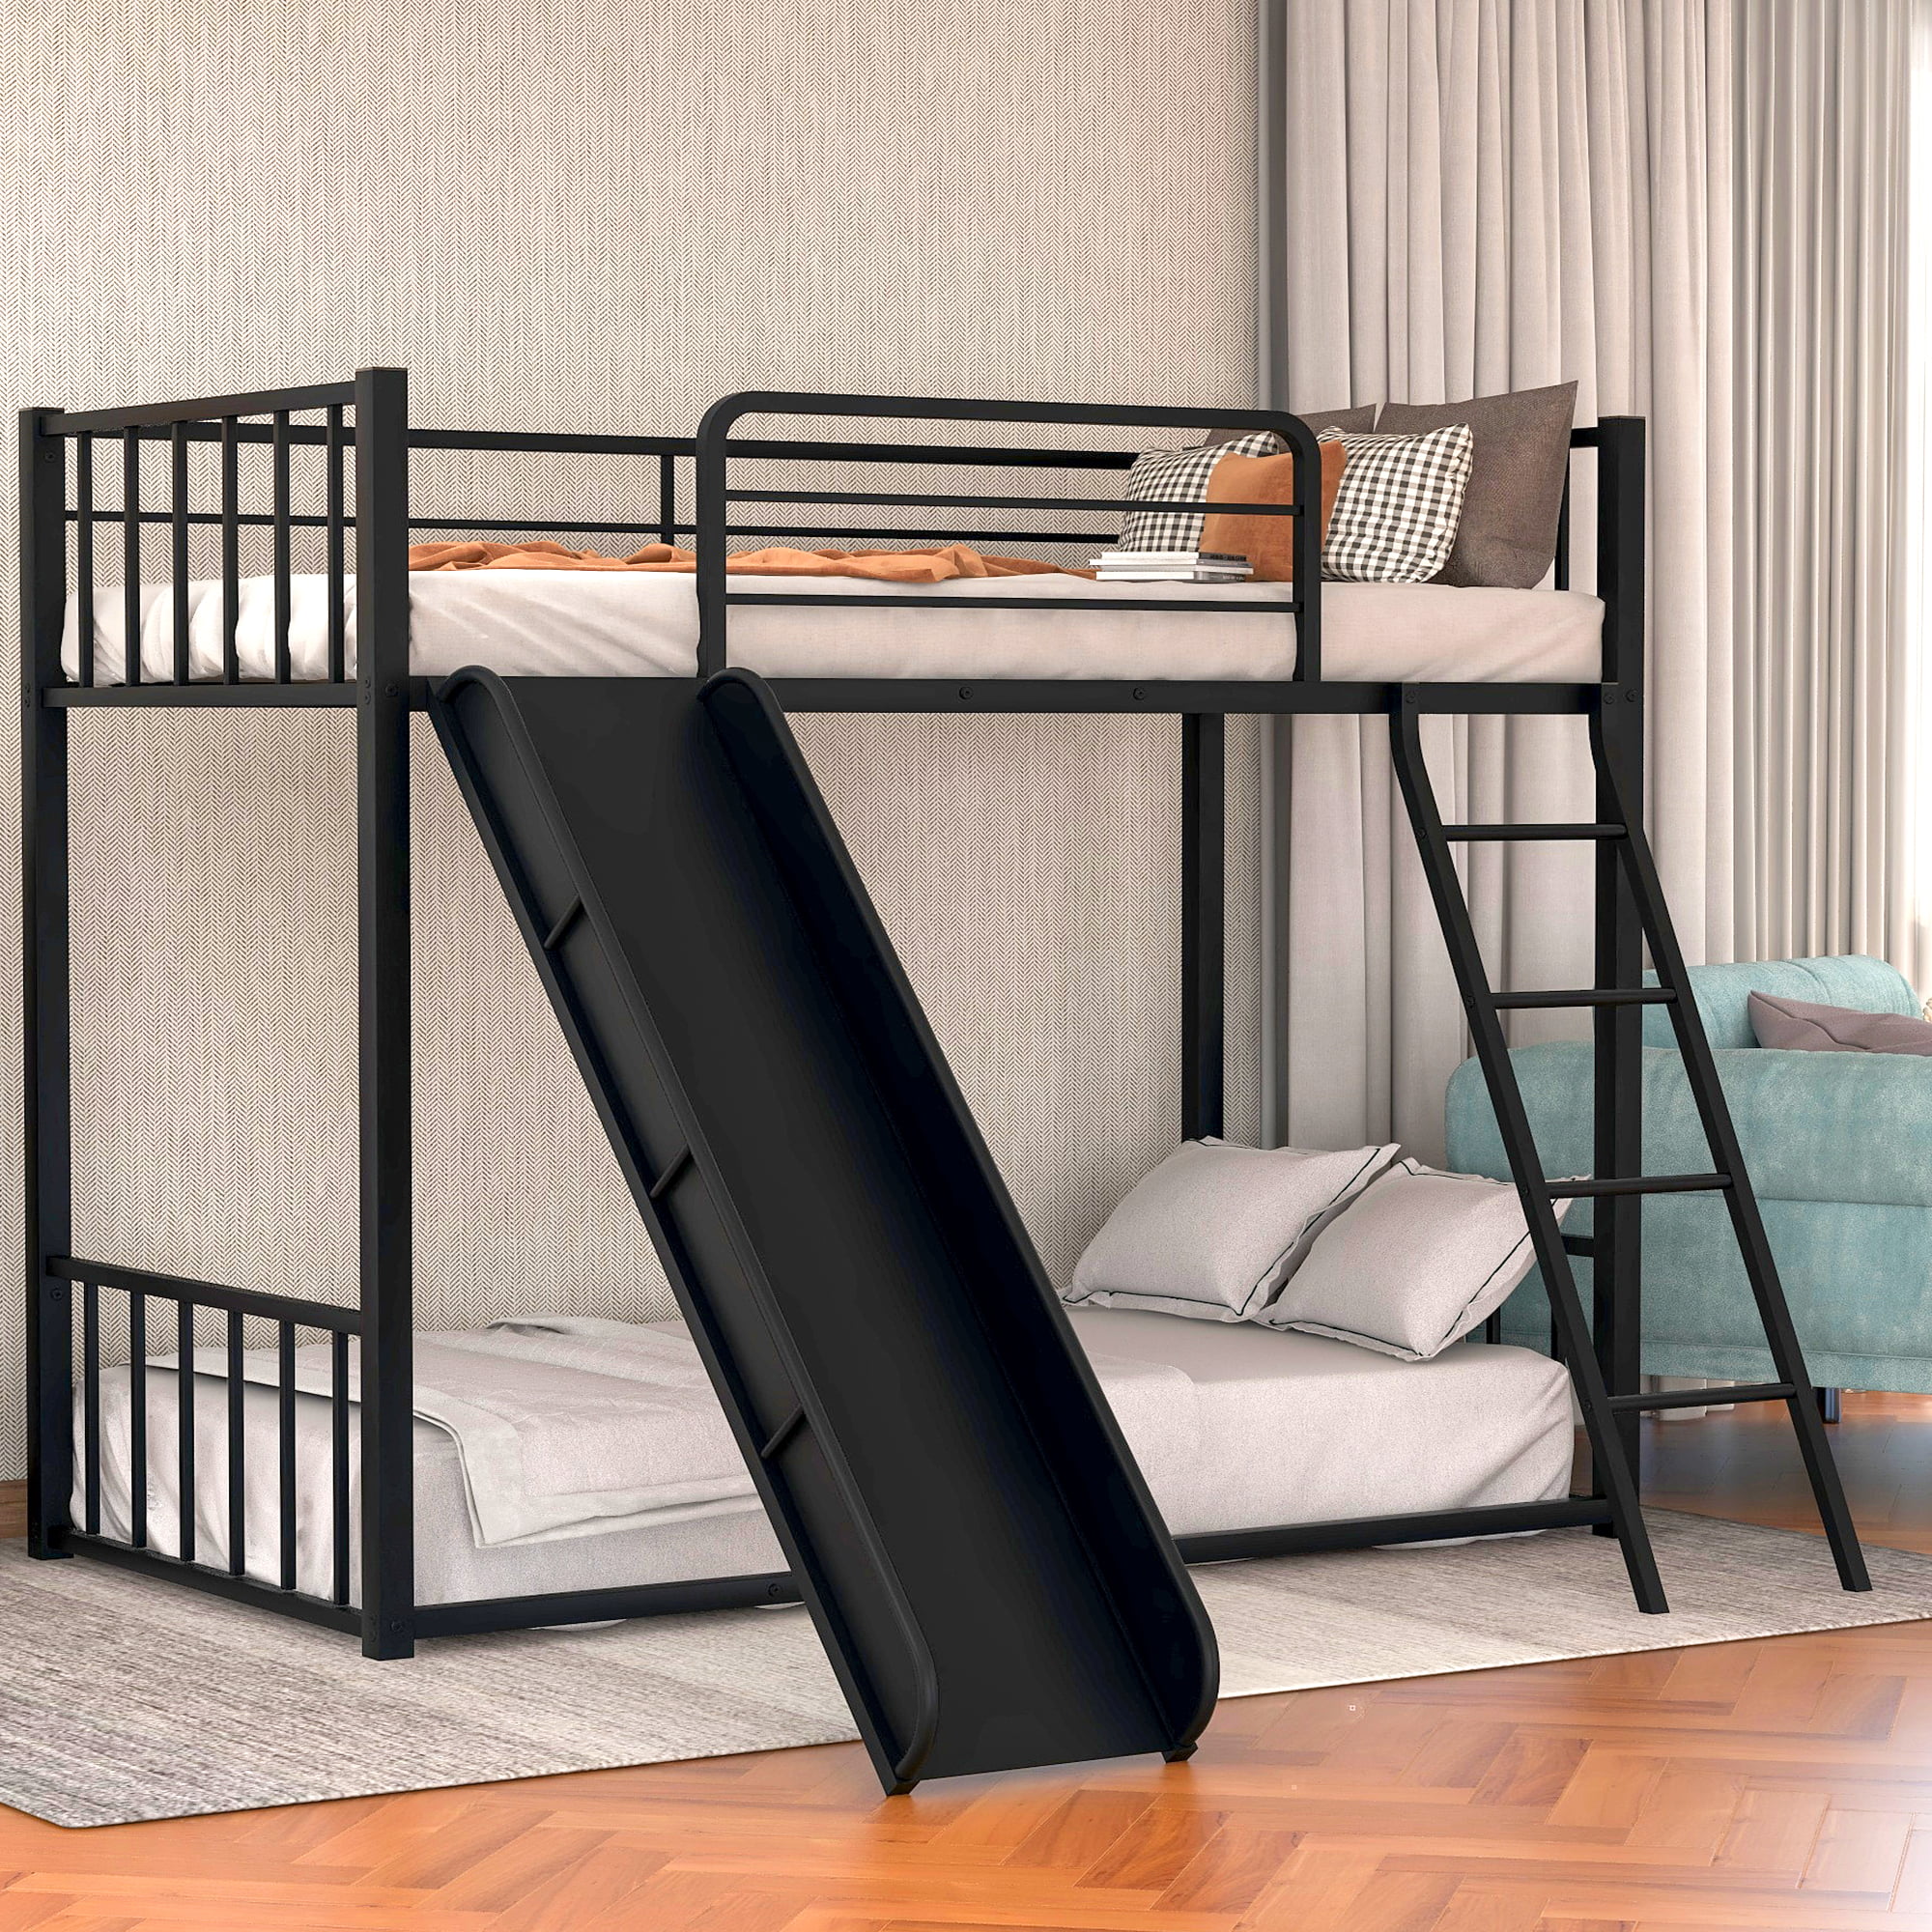 Euroco Metal Bunk Bed Twin Over, Childrens Bunk Beds With Slide